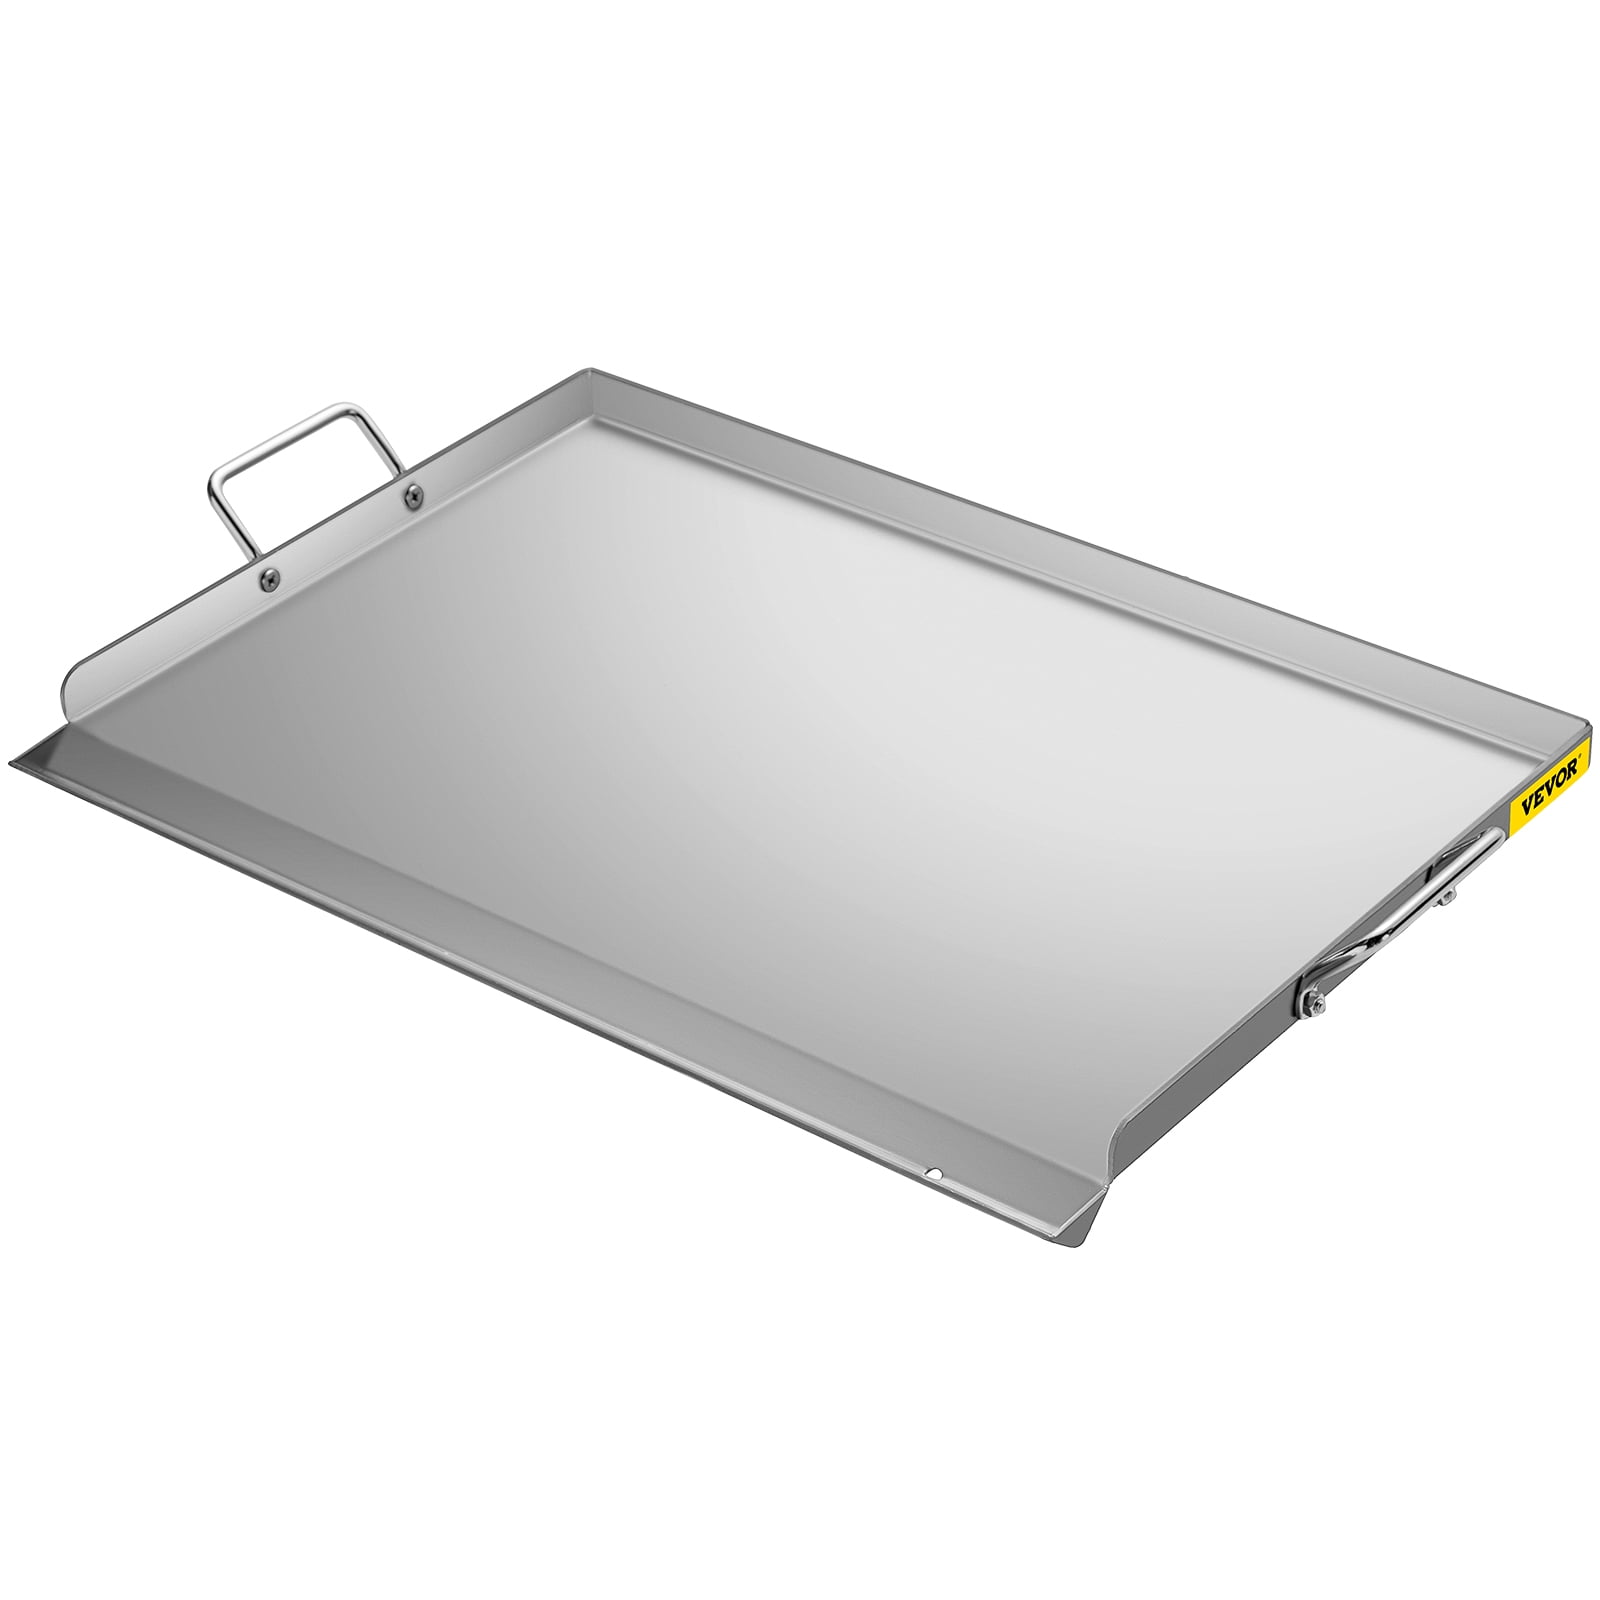 VEVOR Stainless Steel Griddle, 23x16In Griddle Flat Top Plate, Griddle for BBQ Charcoal/Gas Gril with 2 Handles, Rectangular Flat Top Grill with Oil